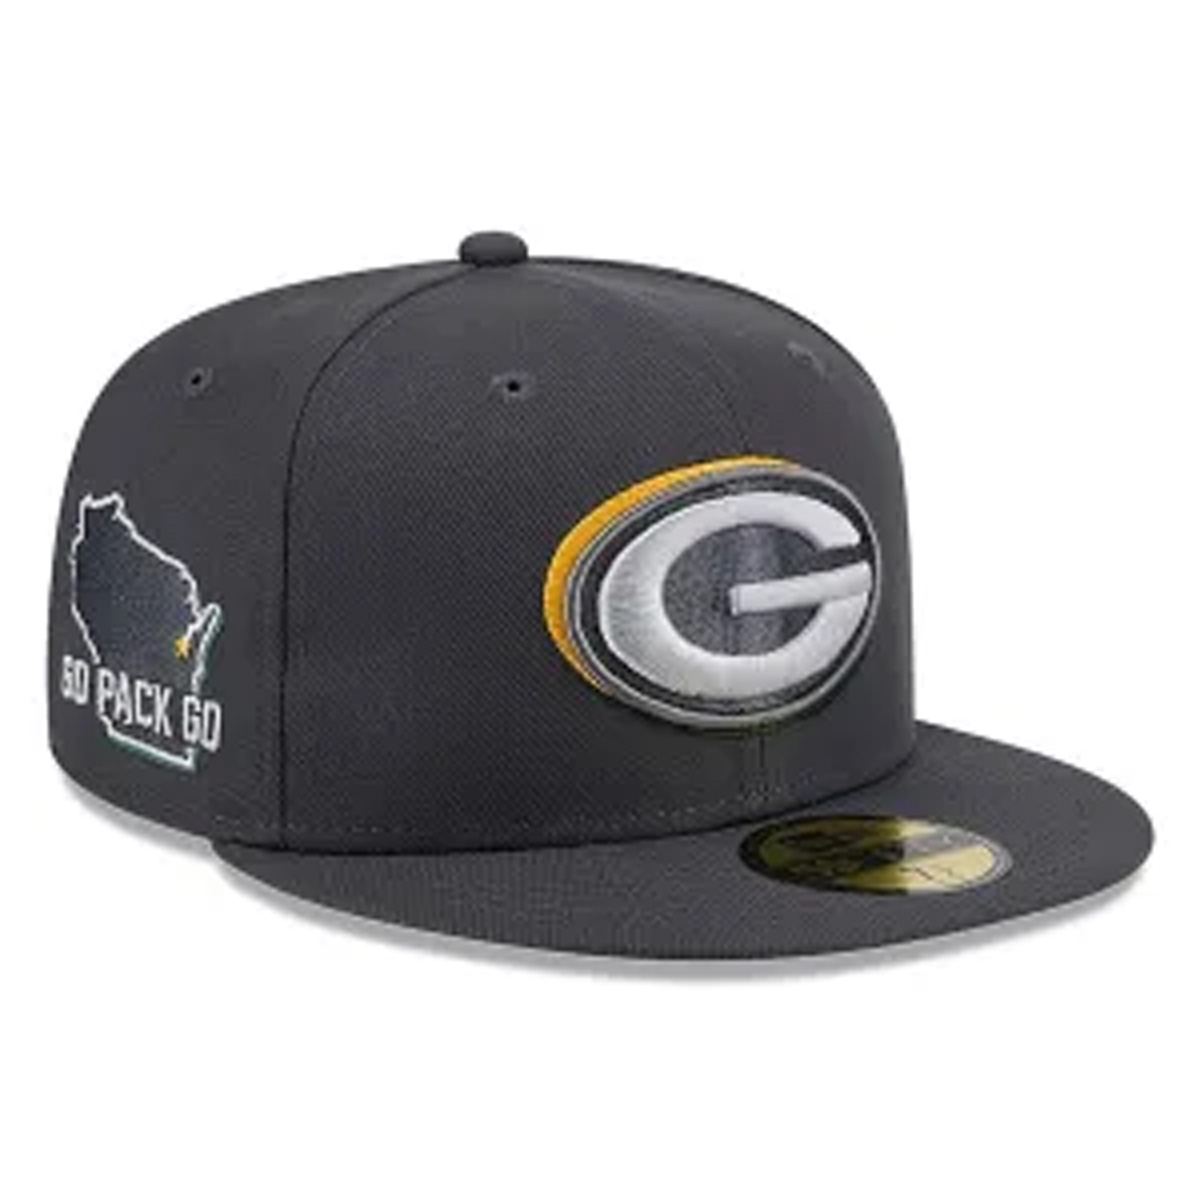 Check out the new Green Bay Packers 2024 NFL Draft hat